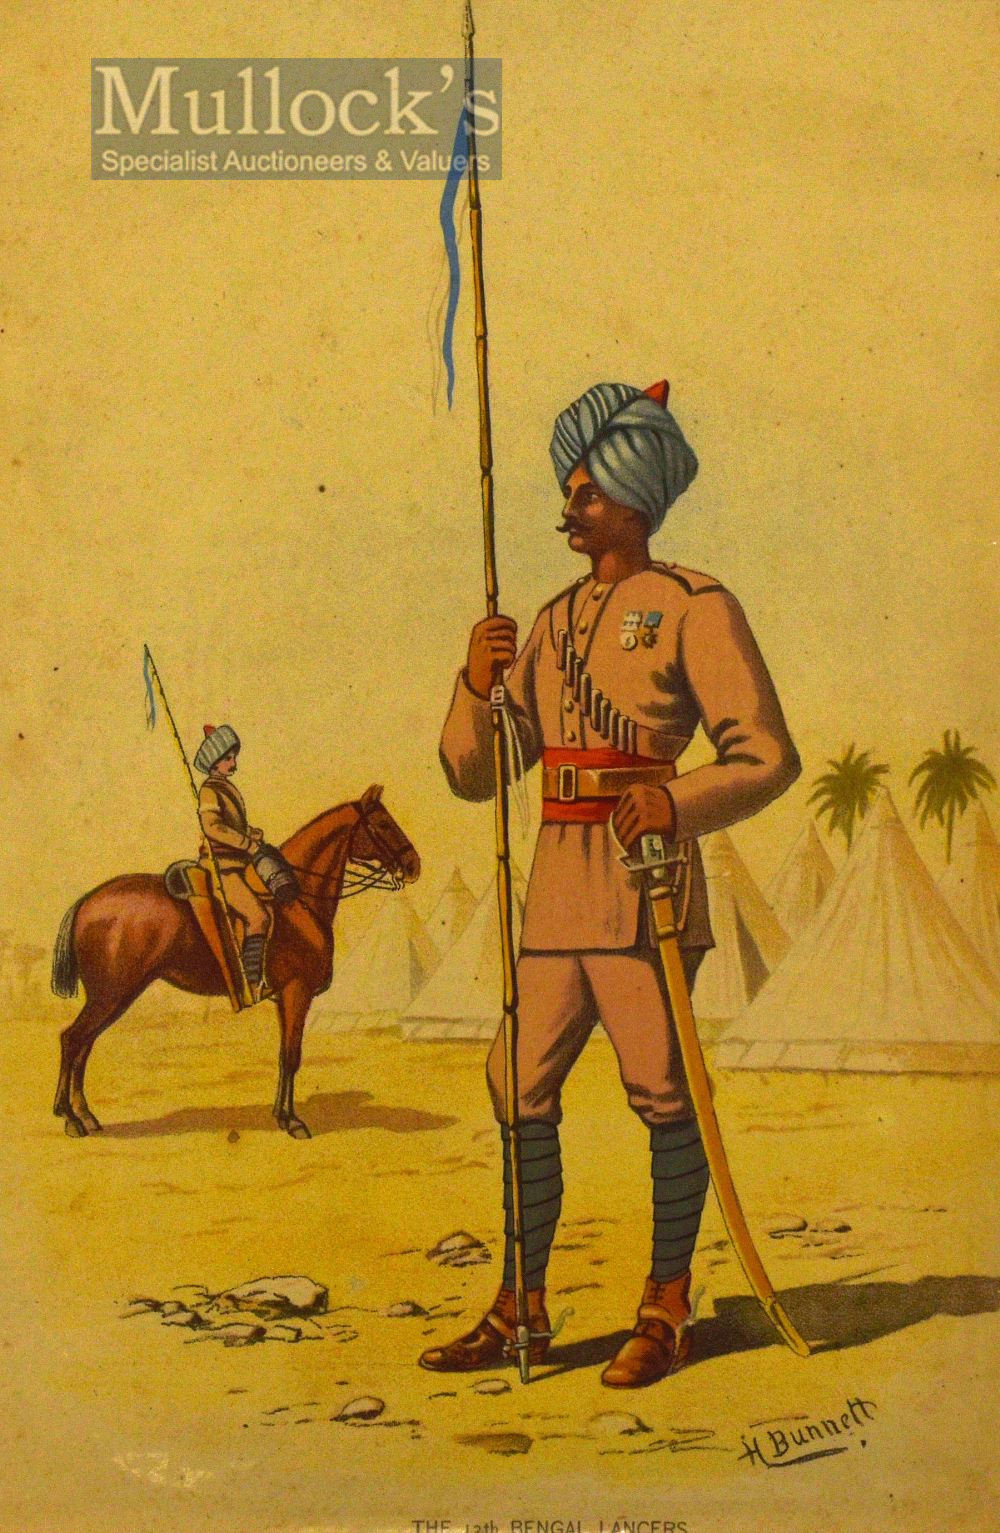 India & Punjab – ‘The 13th Bengal Lancers’ Printed (formerly the 4th Sikh Cavalry raised in 1858),